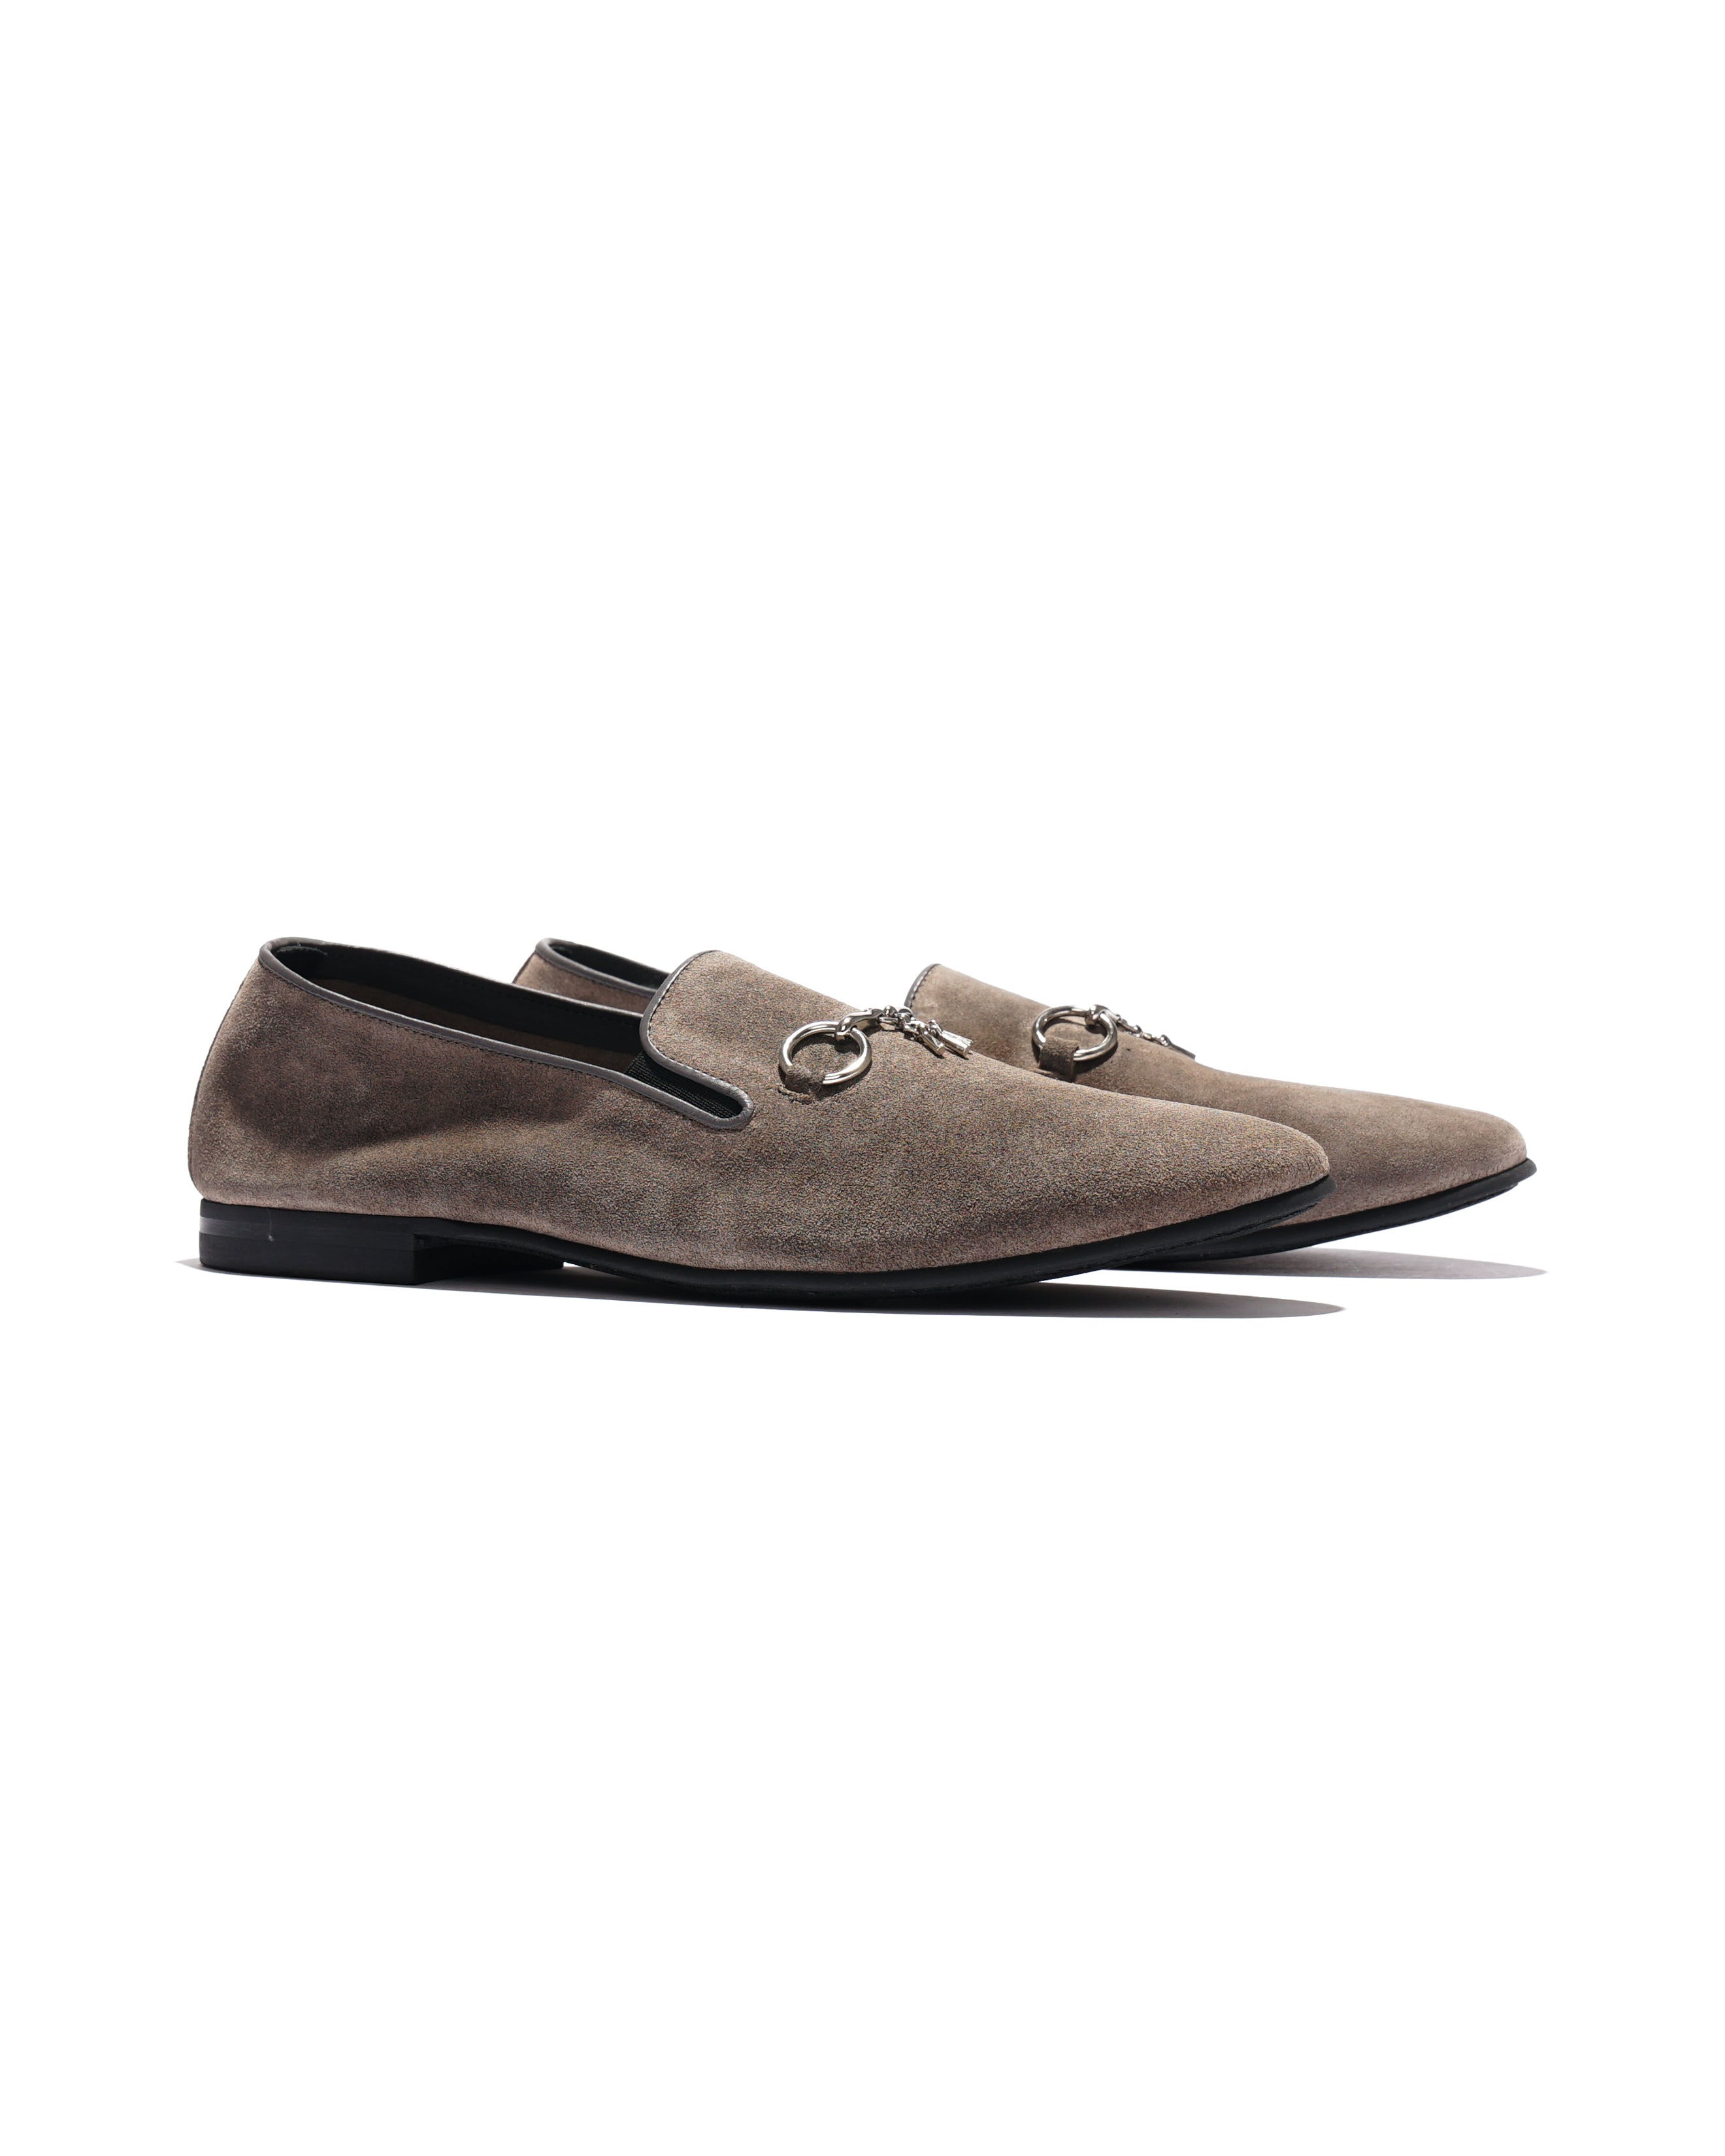 Tassel Bit Unlined Slip-on - Roughout - Taupe